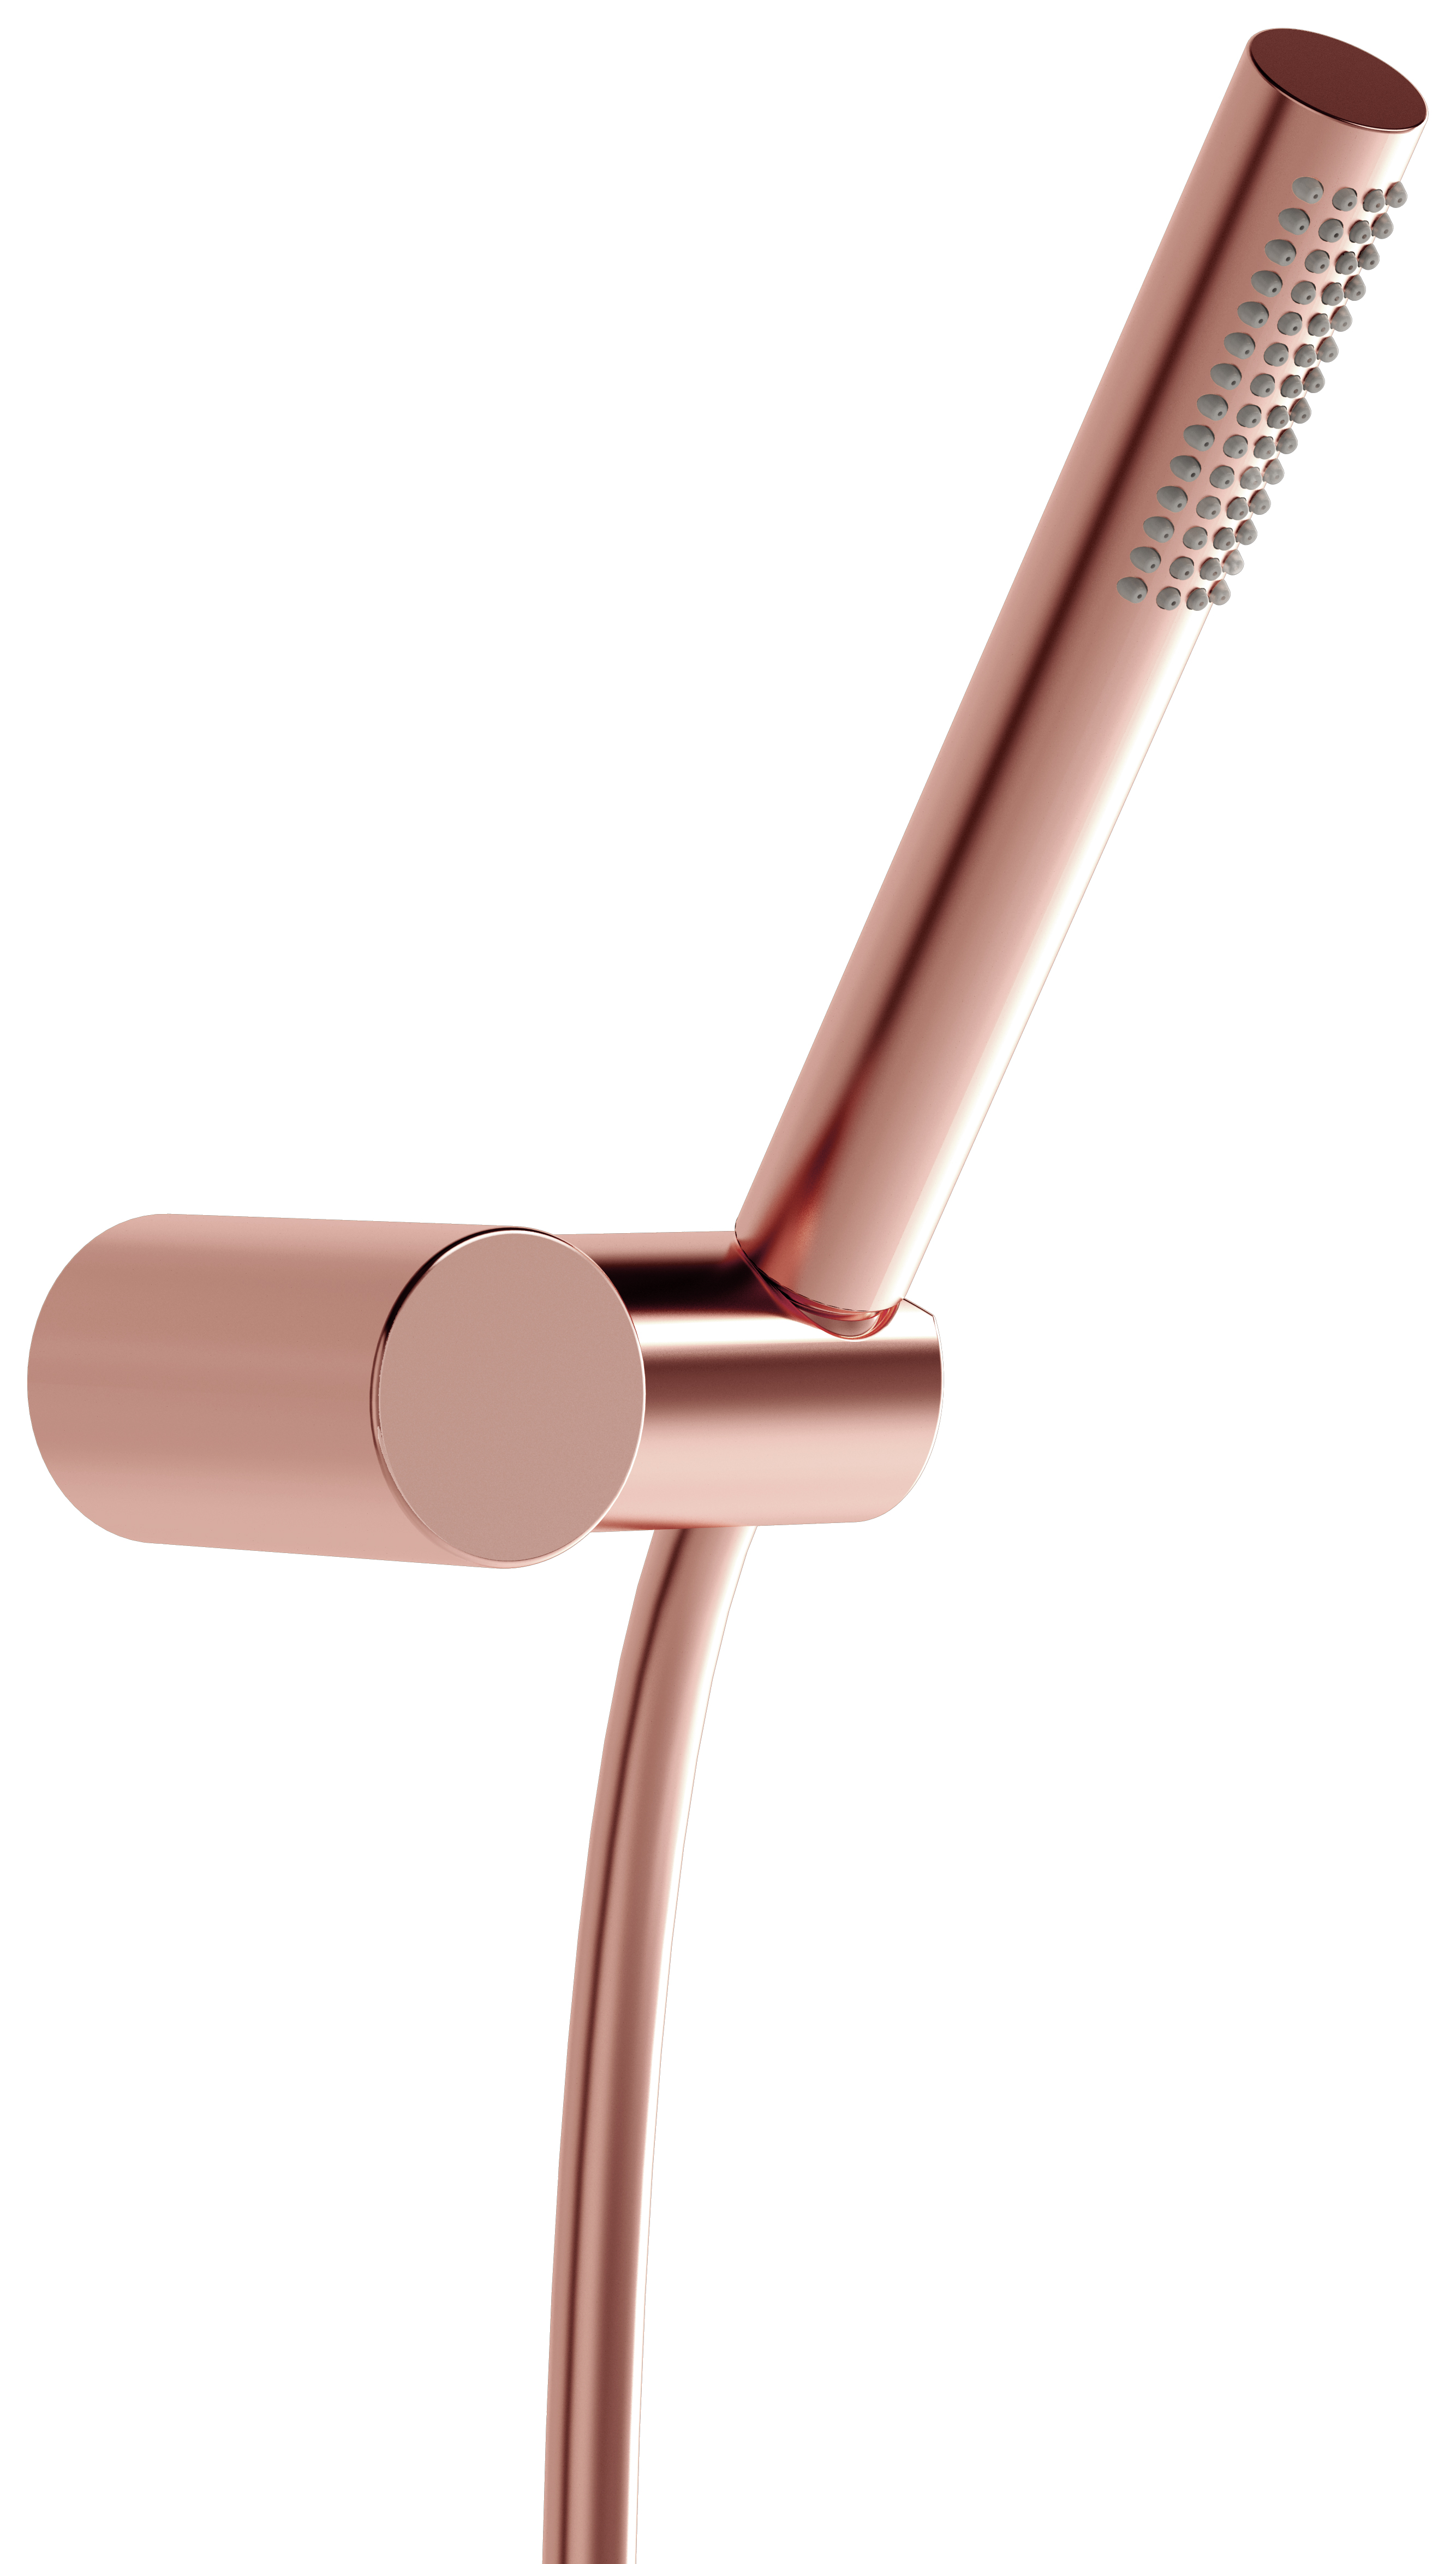 VitrA Origin Pure Soft Copper Shower Handset & Wall Outlet